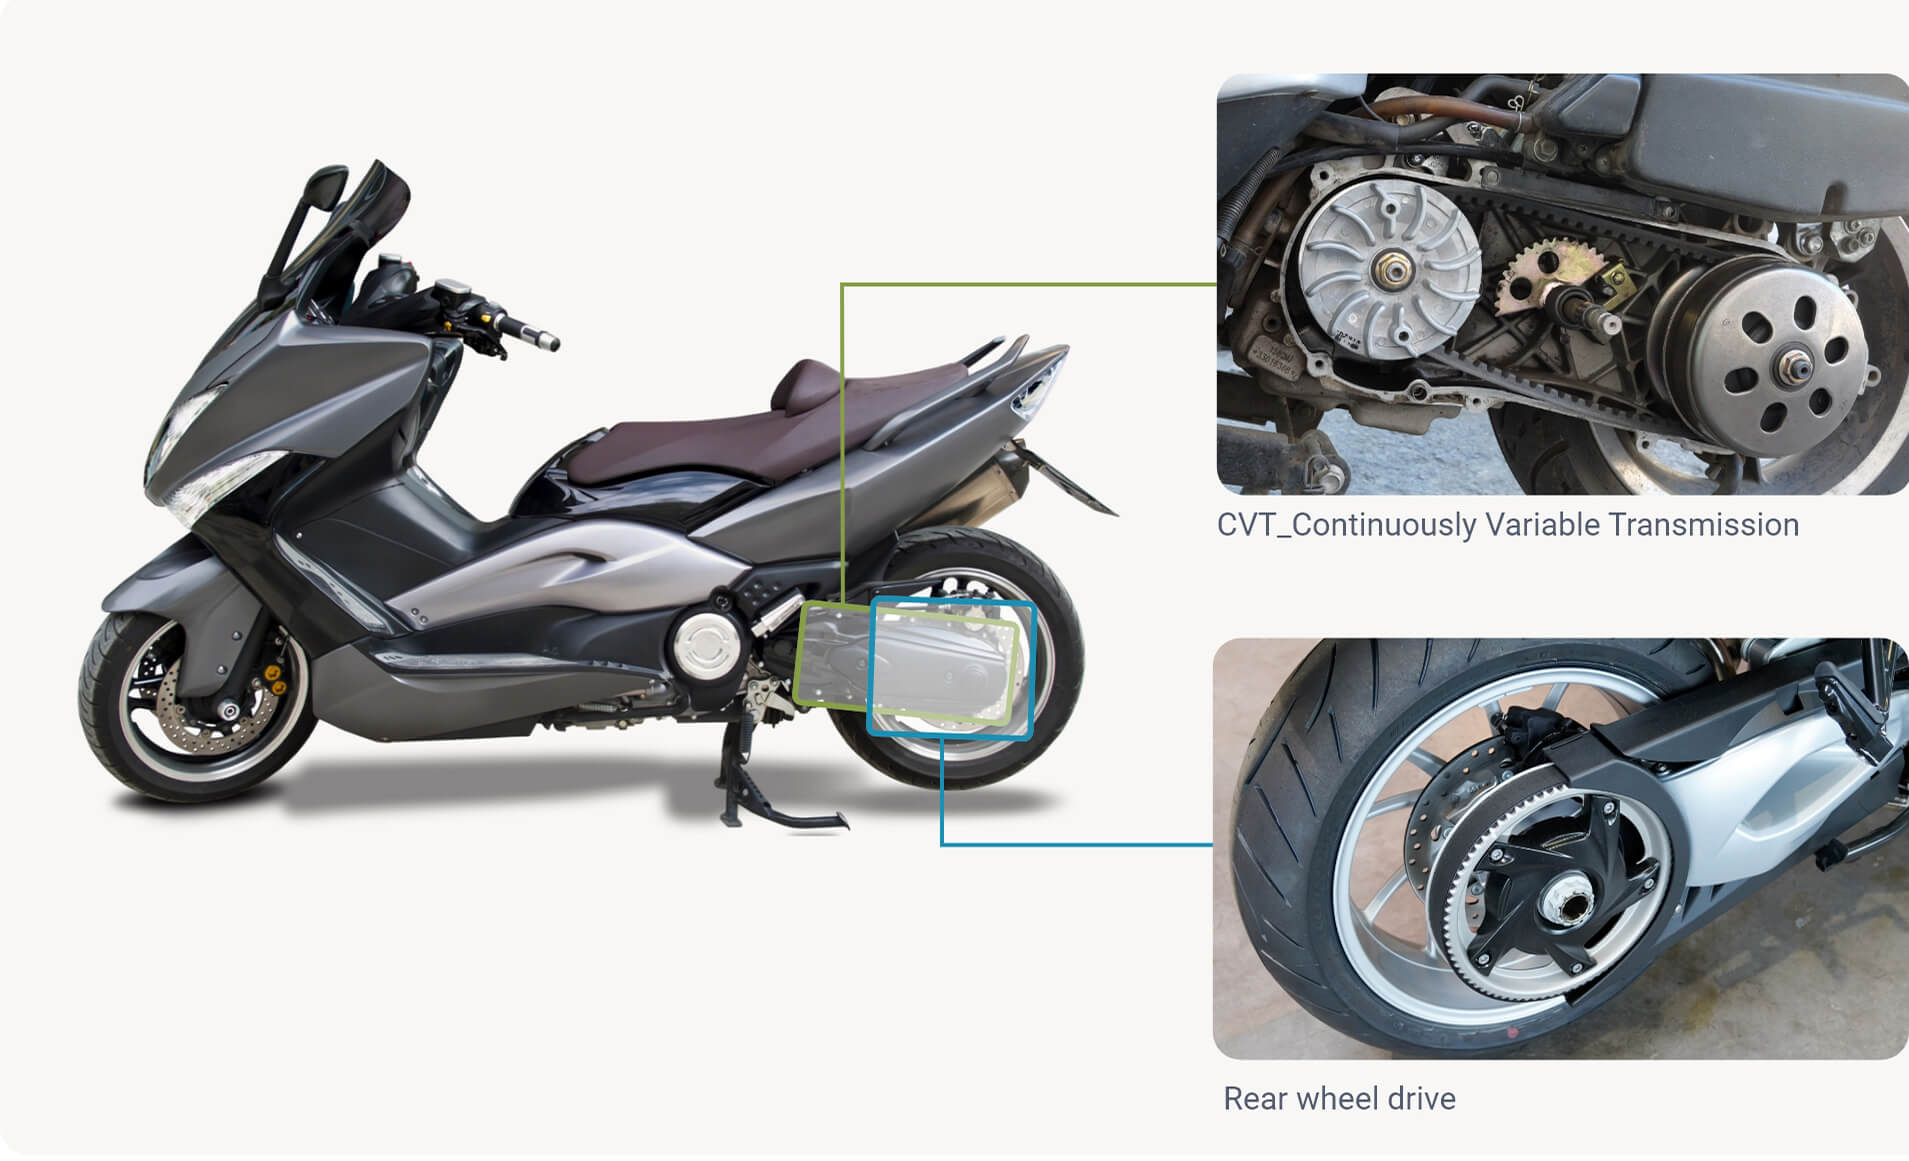 CVT_Continuously Variable Transmission / Rear wheel drive